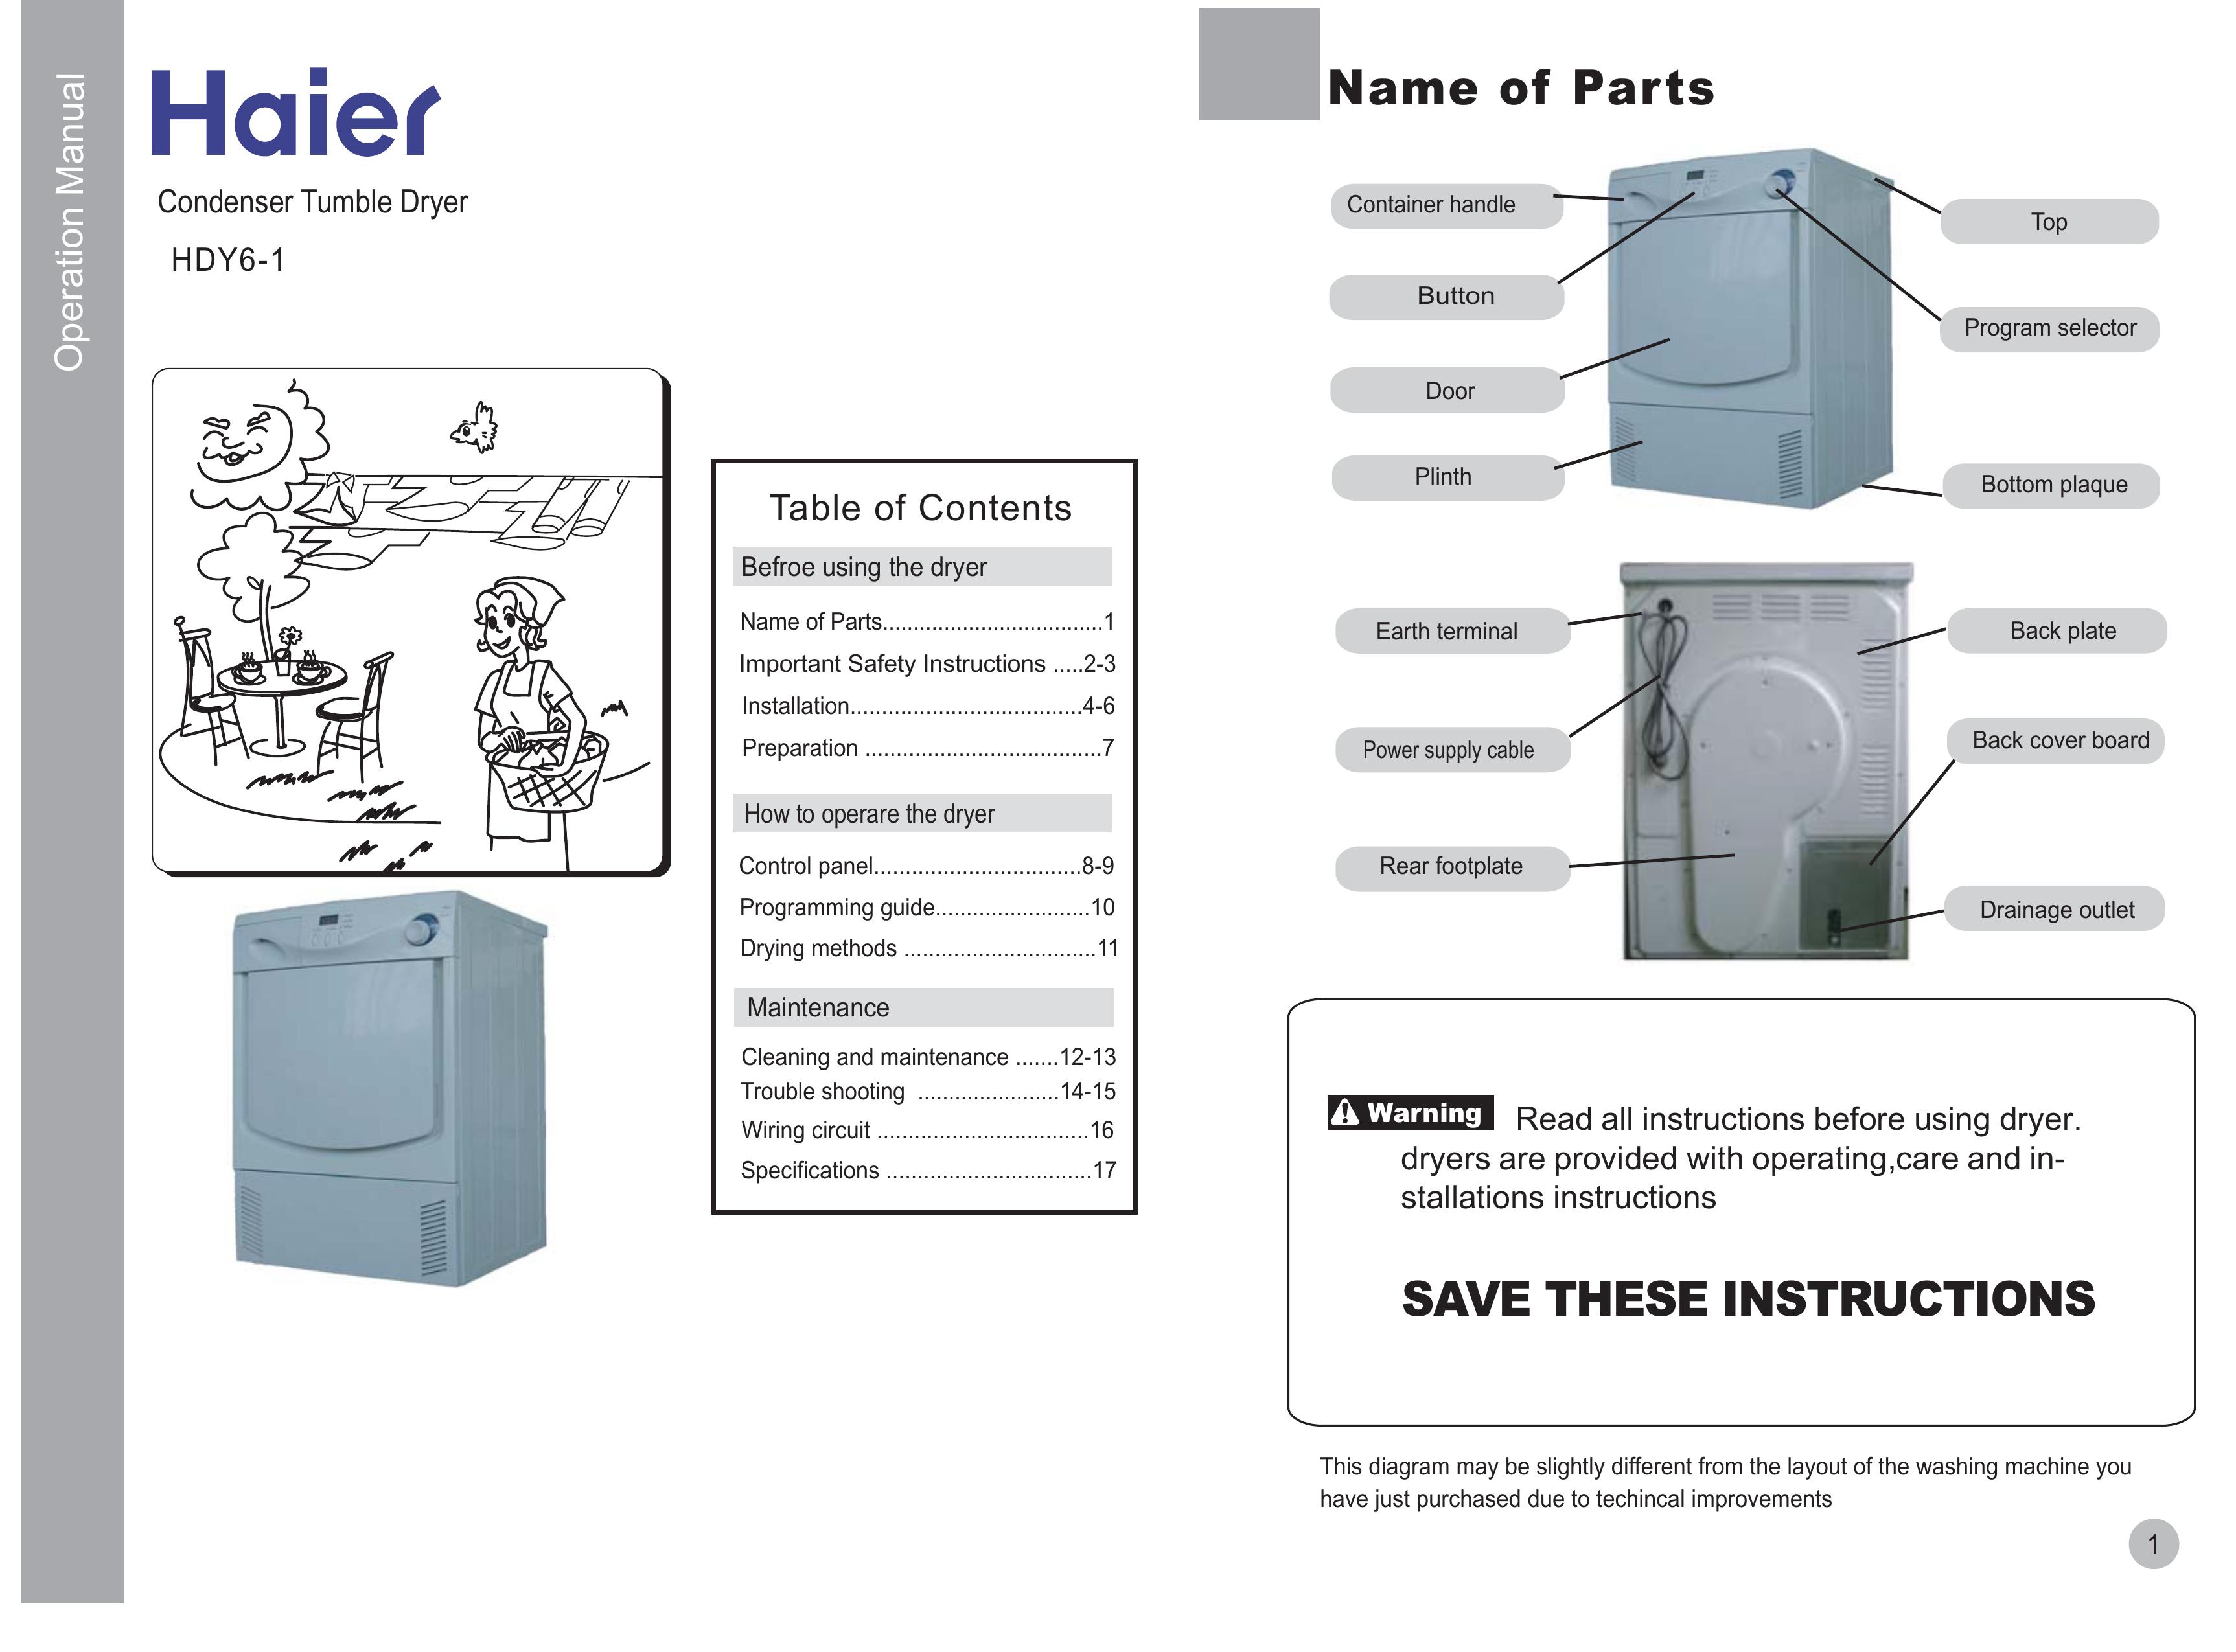 Haier HDY6-1 Clothes Dryer User Manual